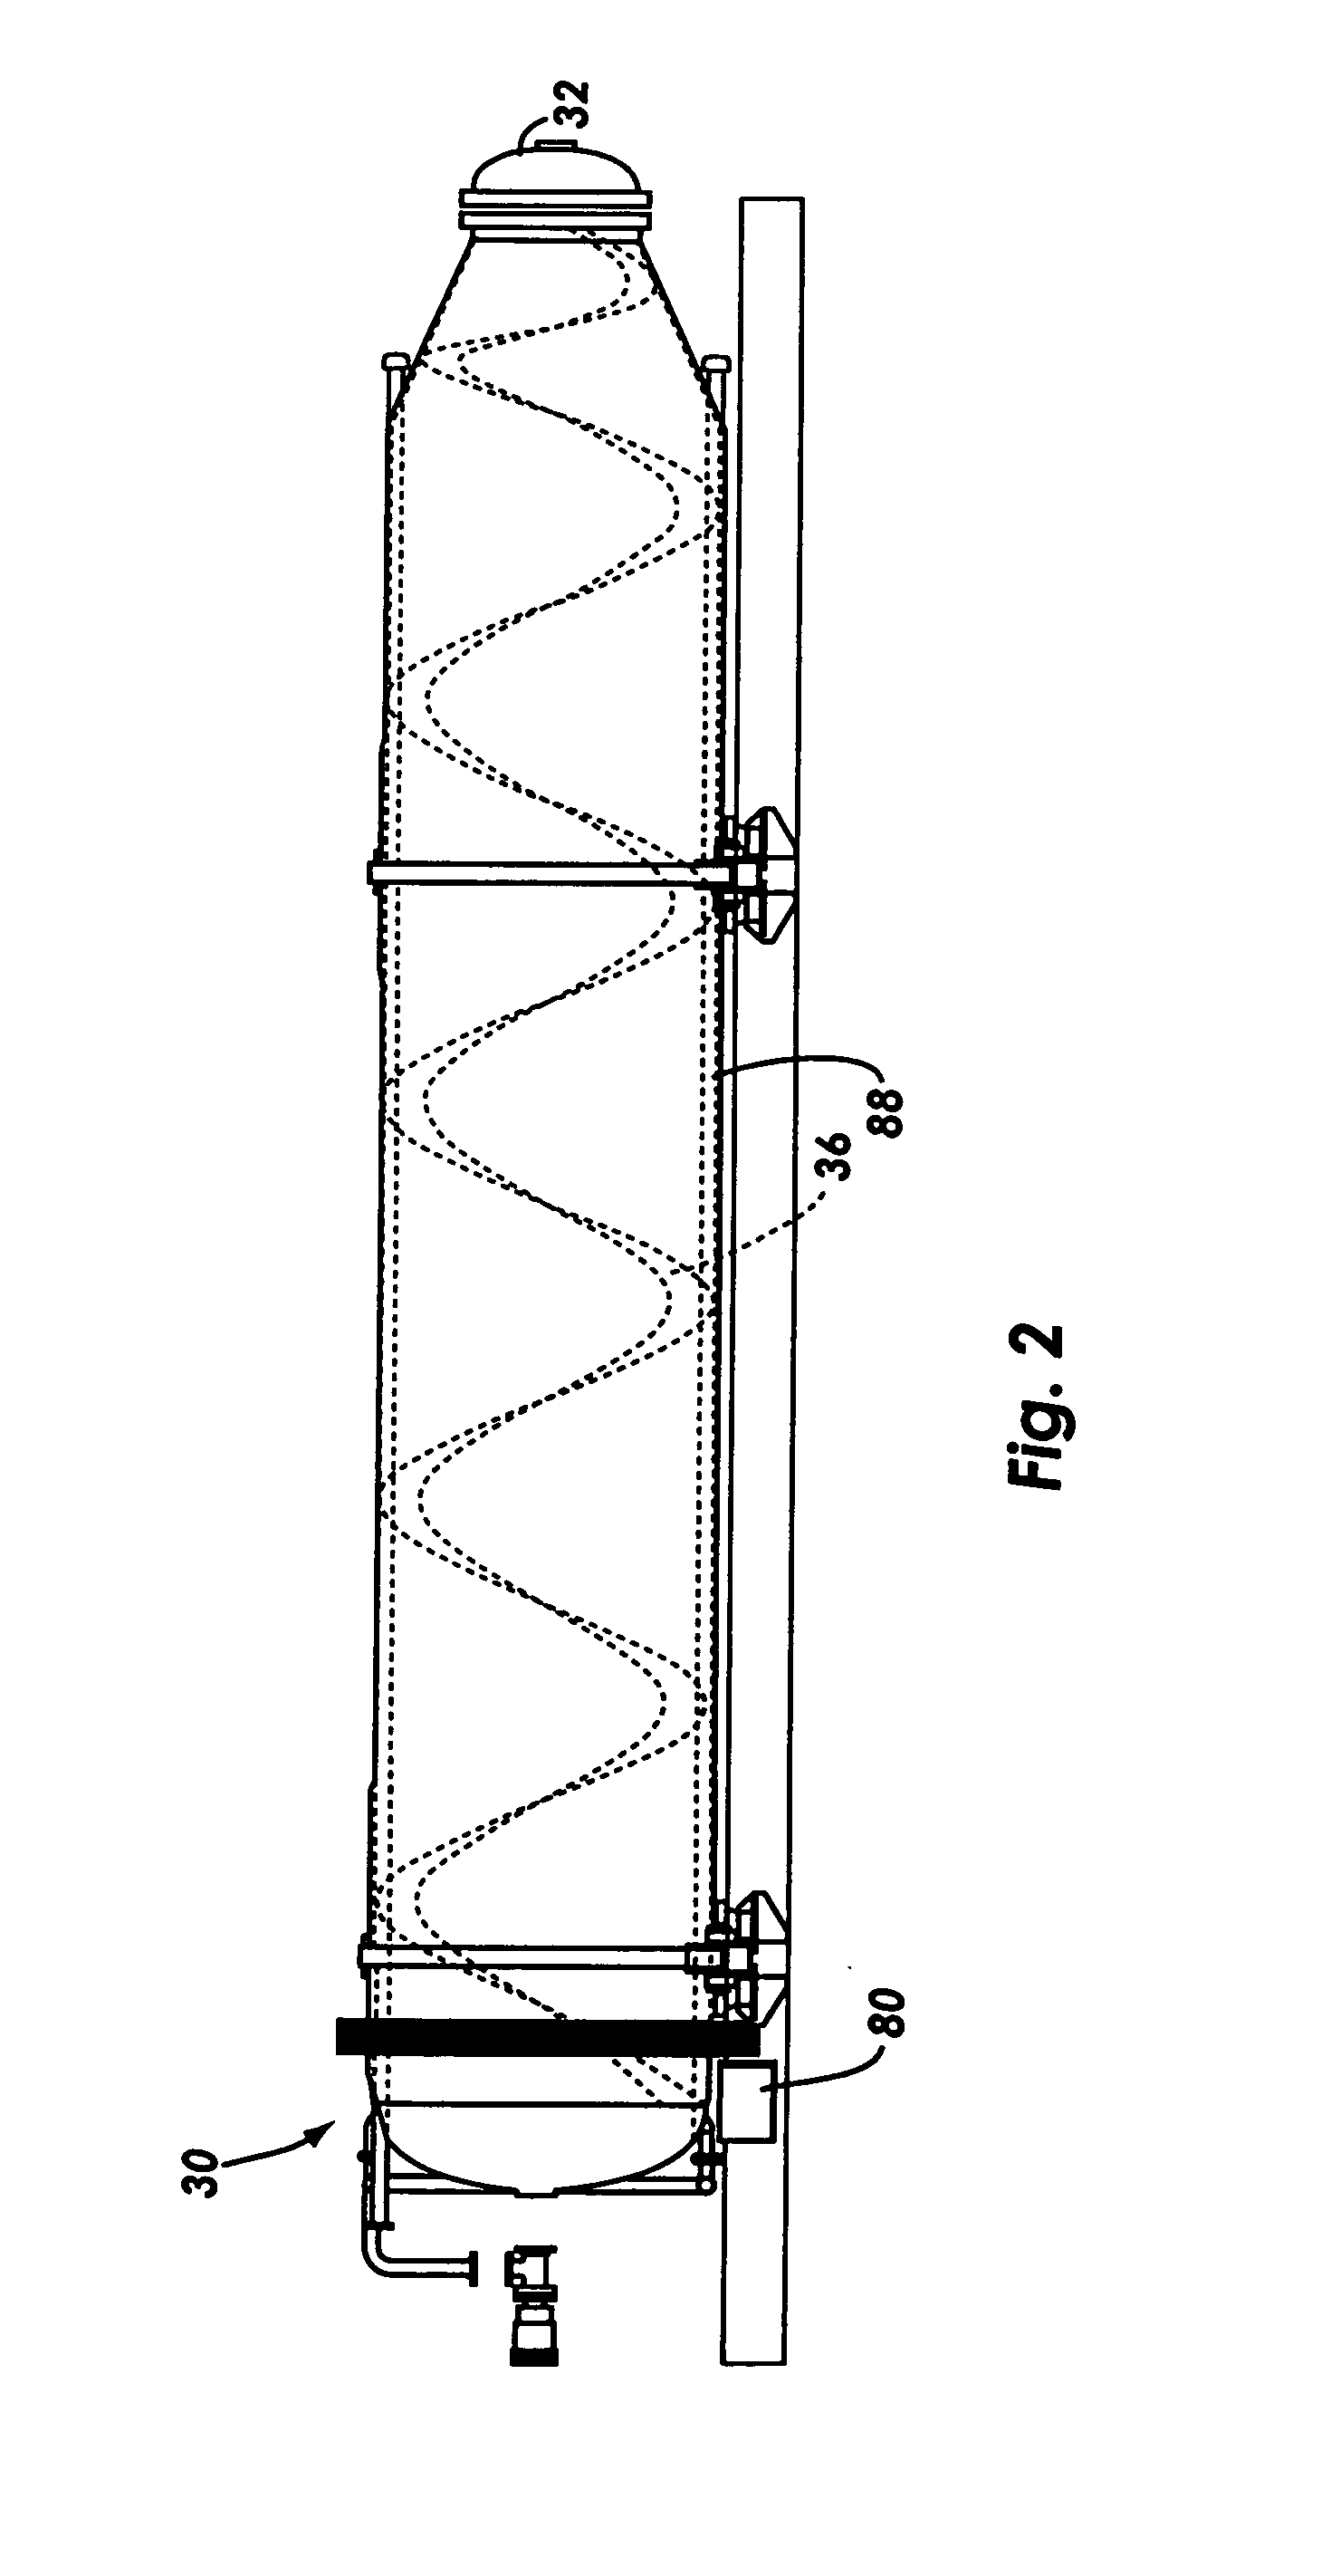 Soil amendment product and method of processing